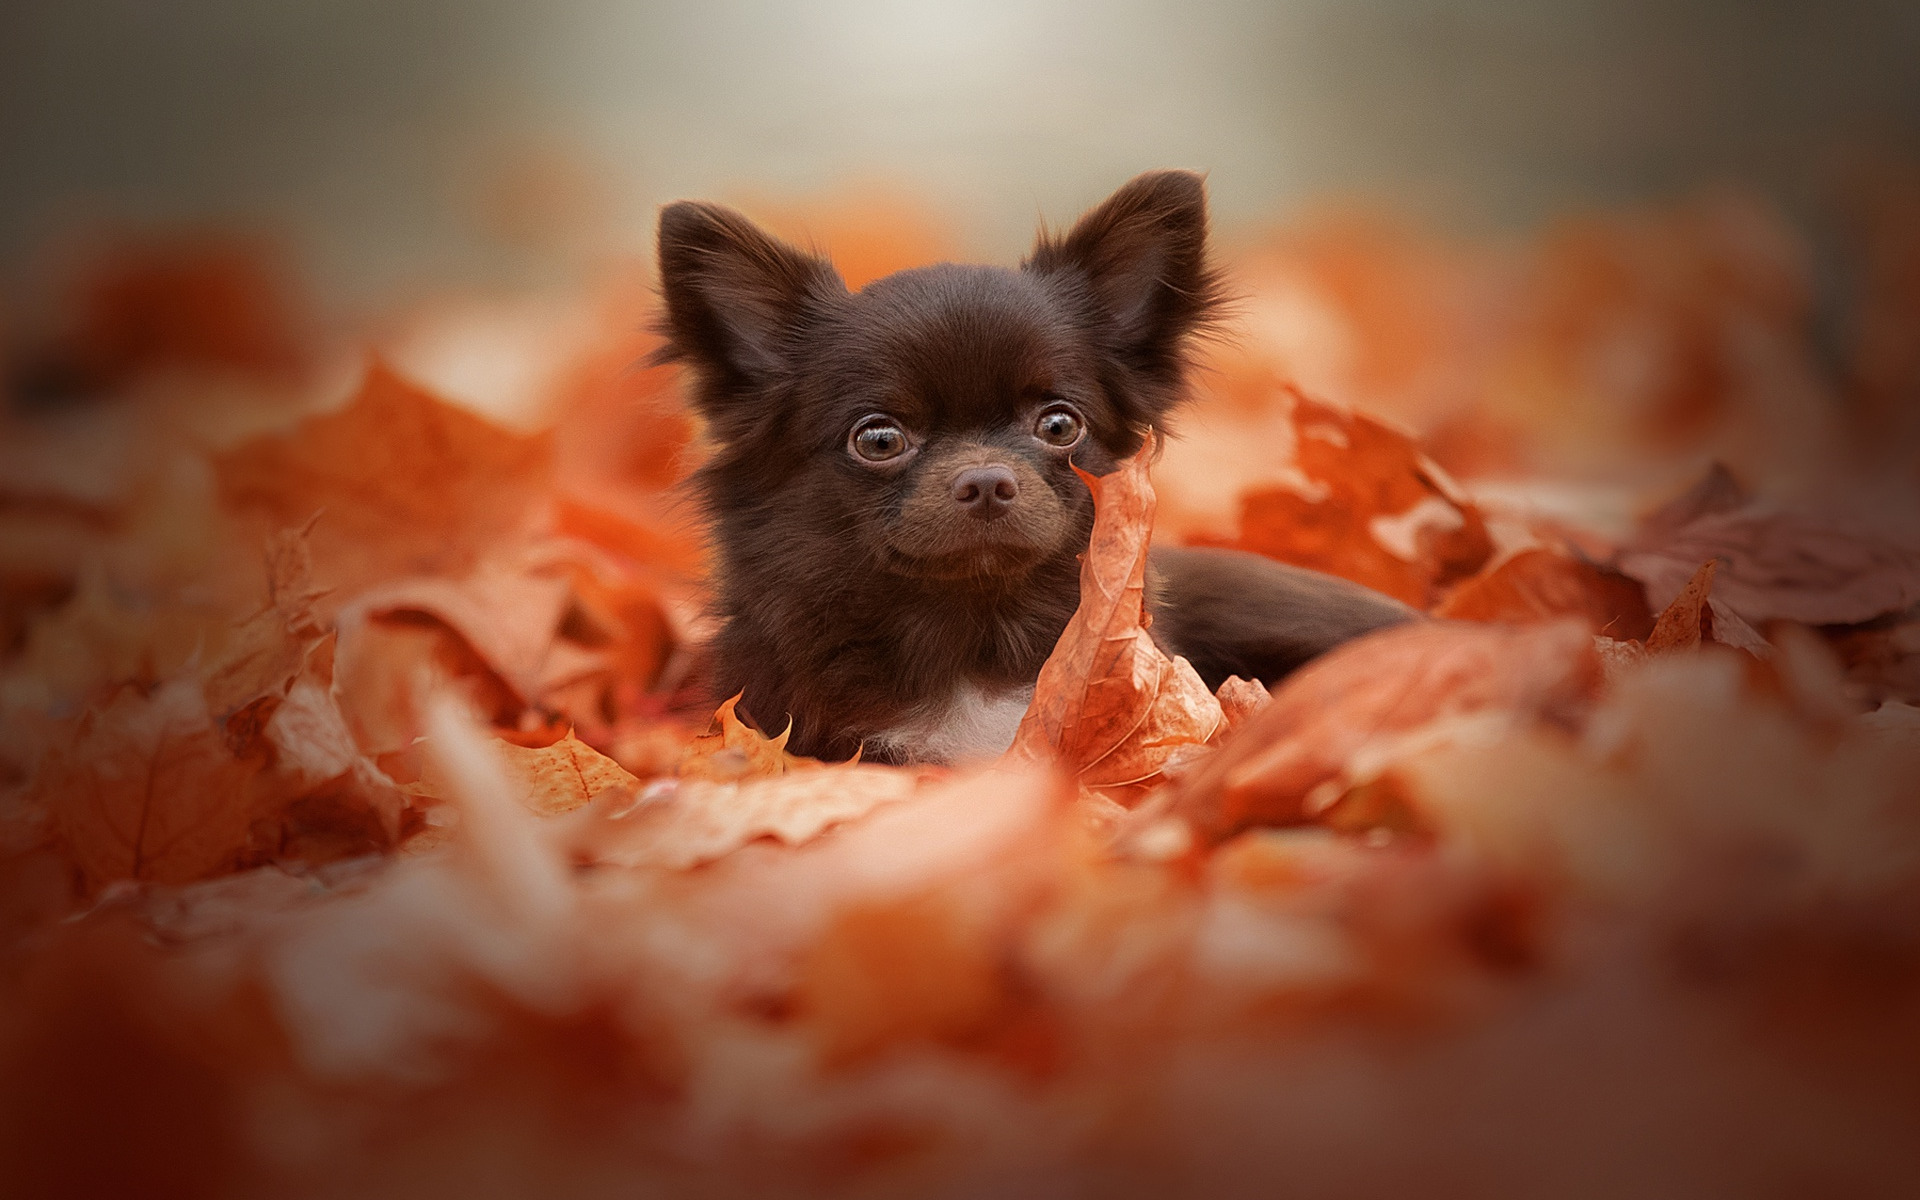 Download wallpapers brown little chihuahua, yellow autumn leaves, small cute dog, pets